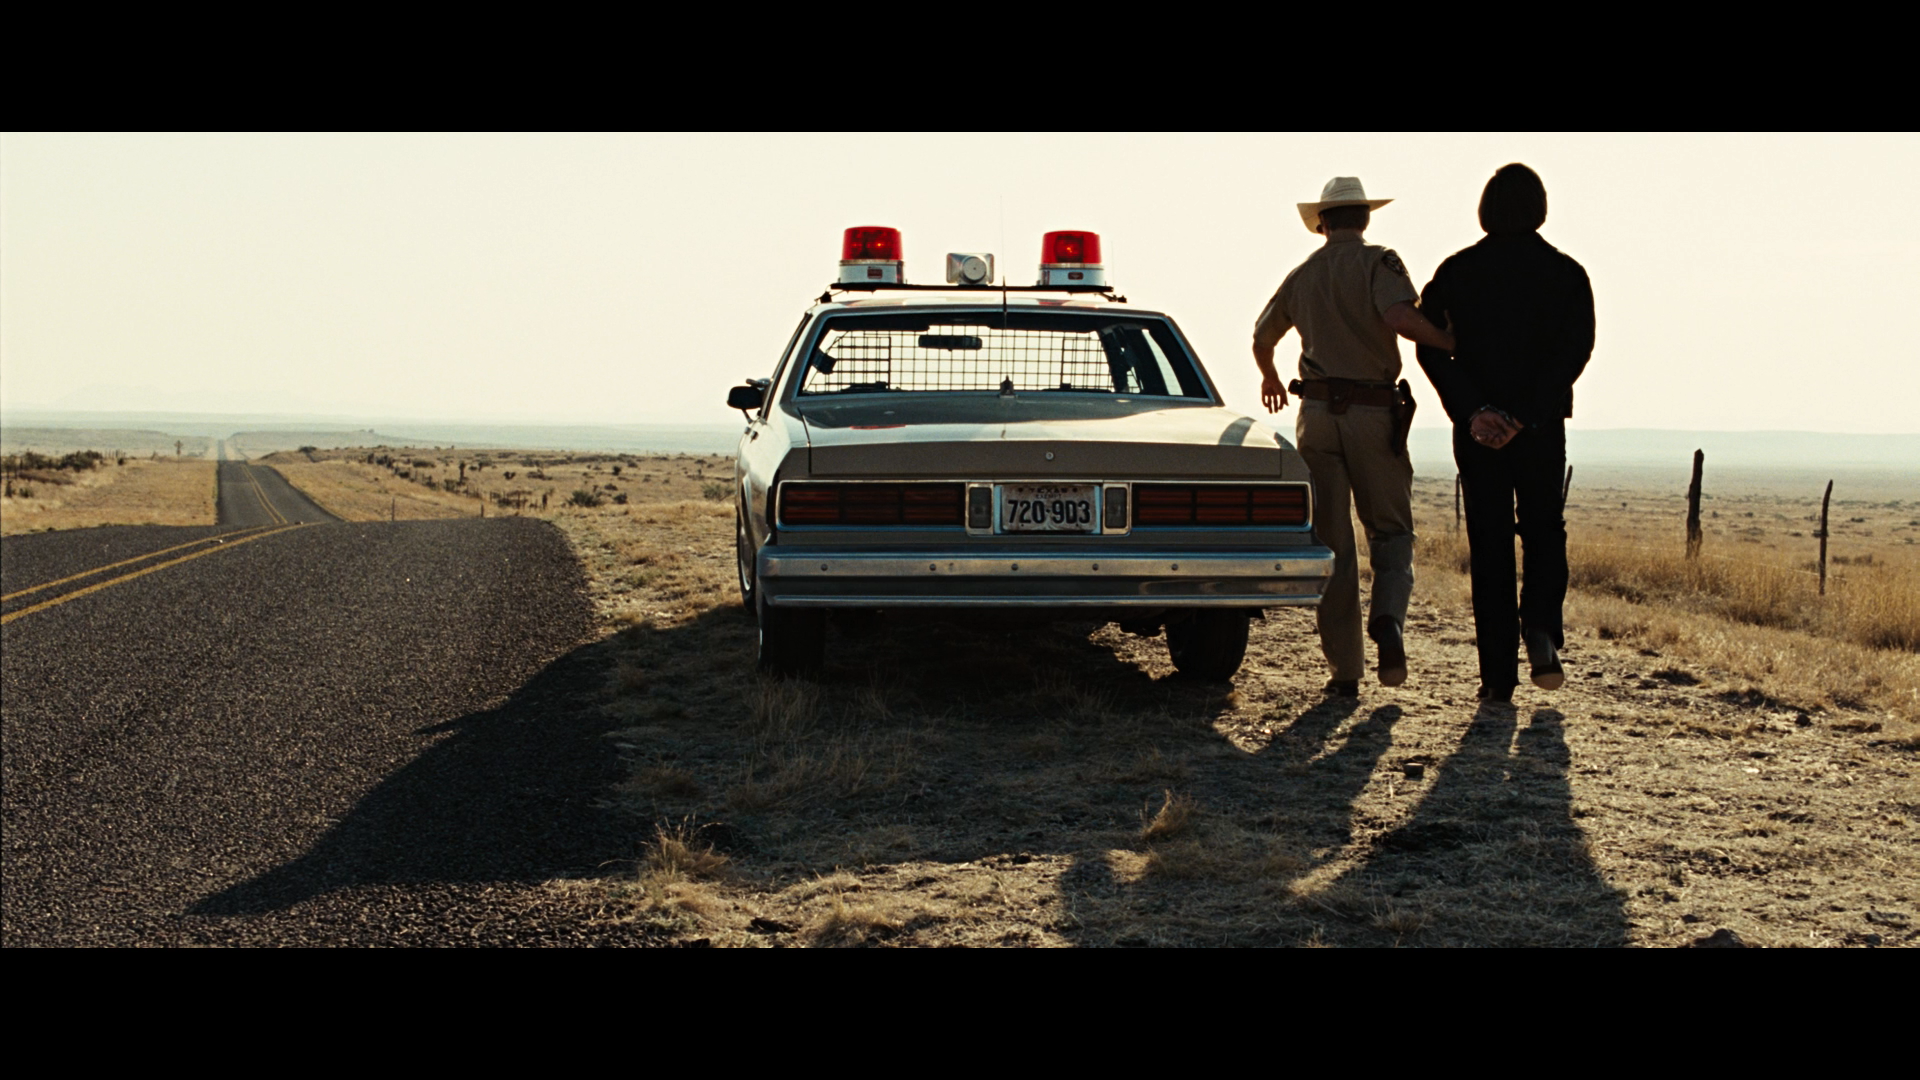 Movie No Country For Old Men HD Wallpaper | Background Image